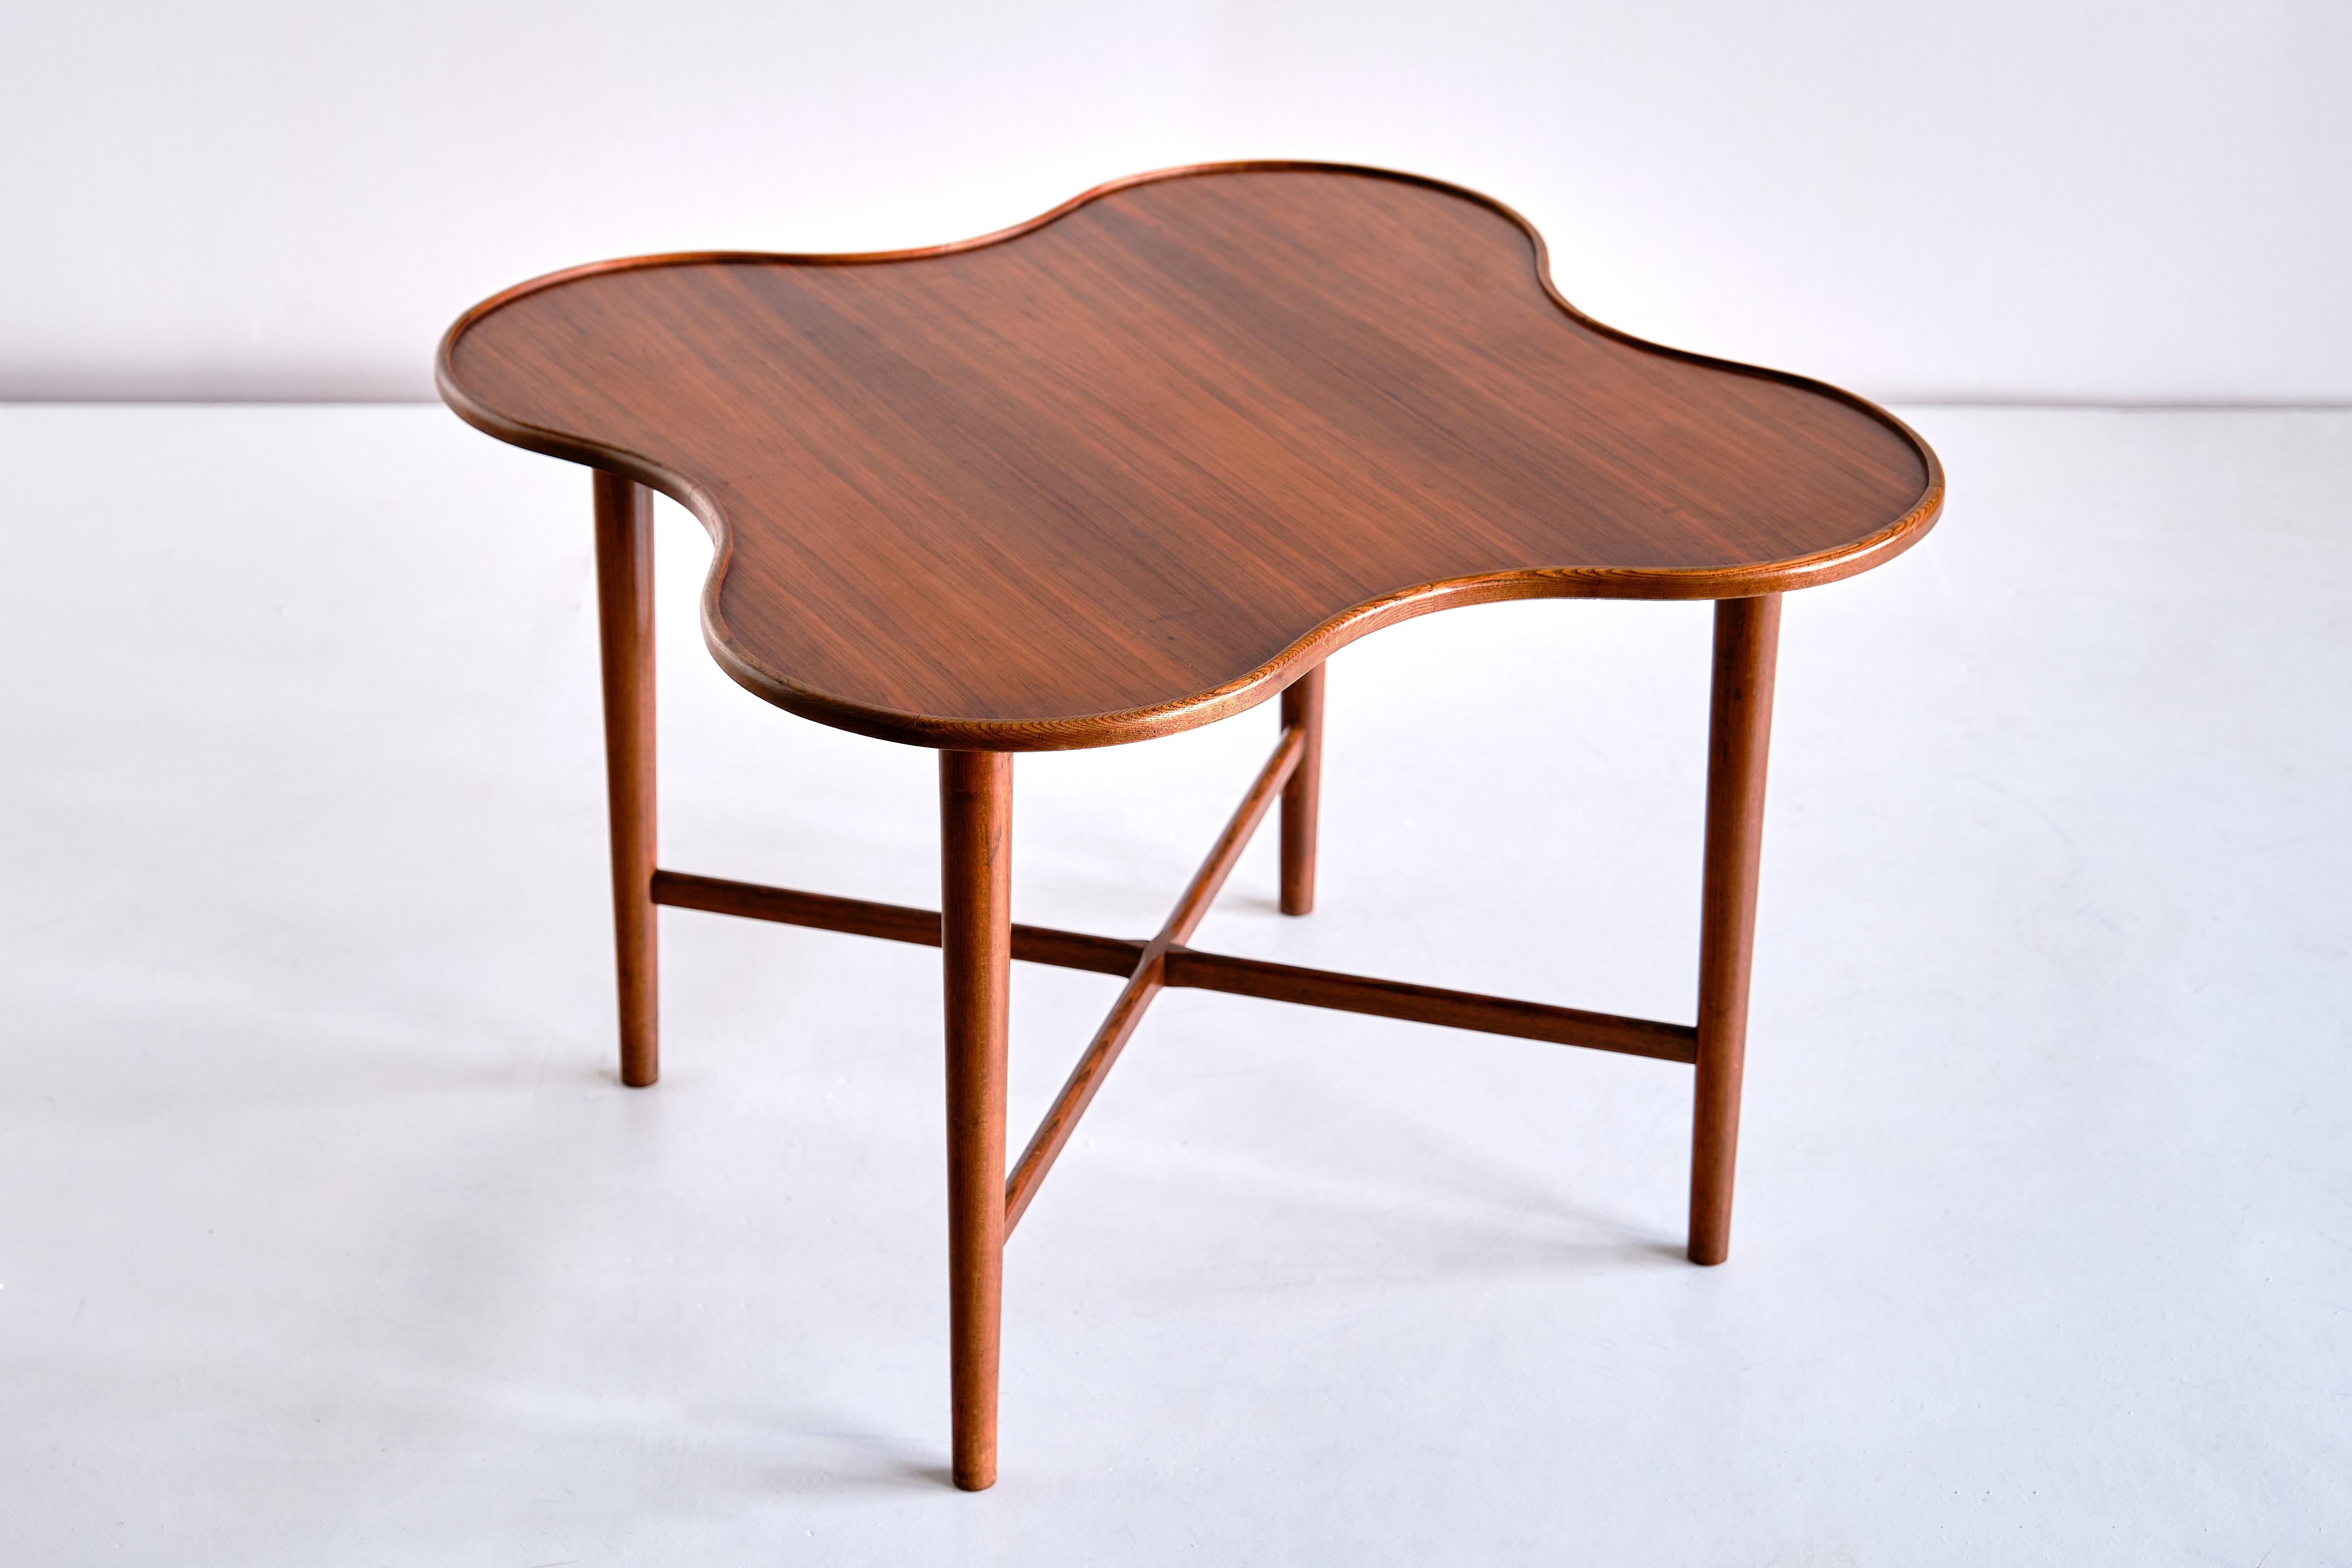 This very rare side table was produced in Denmark in the early 1960s. The design is attributed to Arne Vodder, produced by the manufacturer Bovirke. The quatrefoil shape of the top, executed in a beautifully veneered teak wood, gives the table a